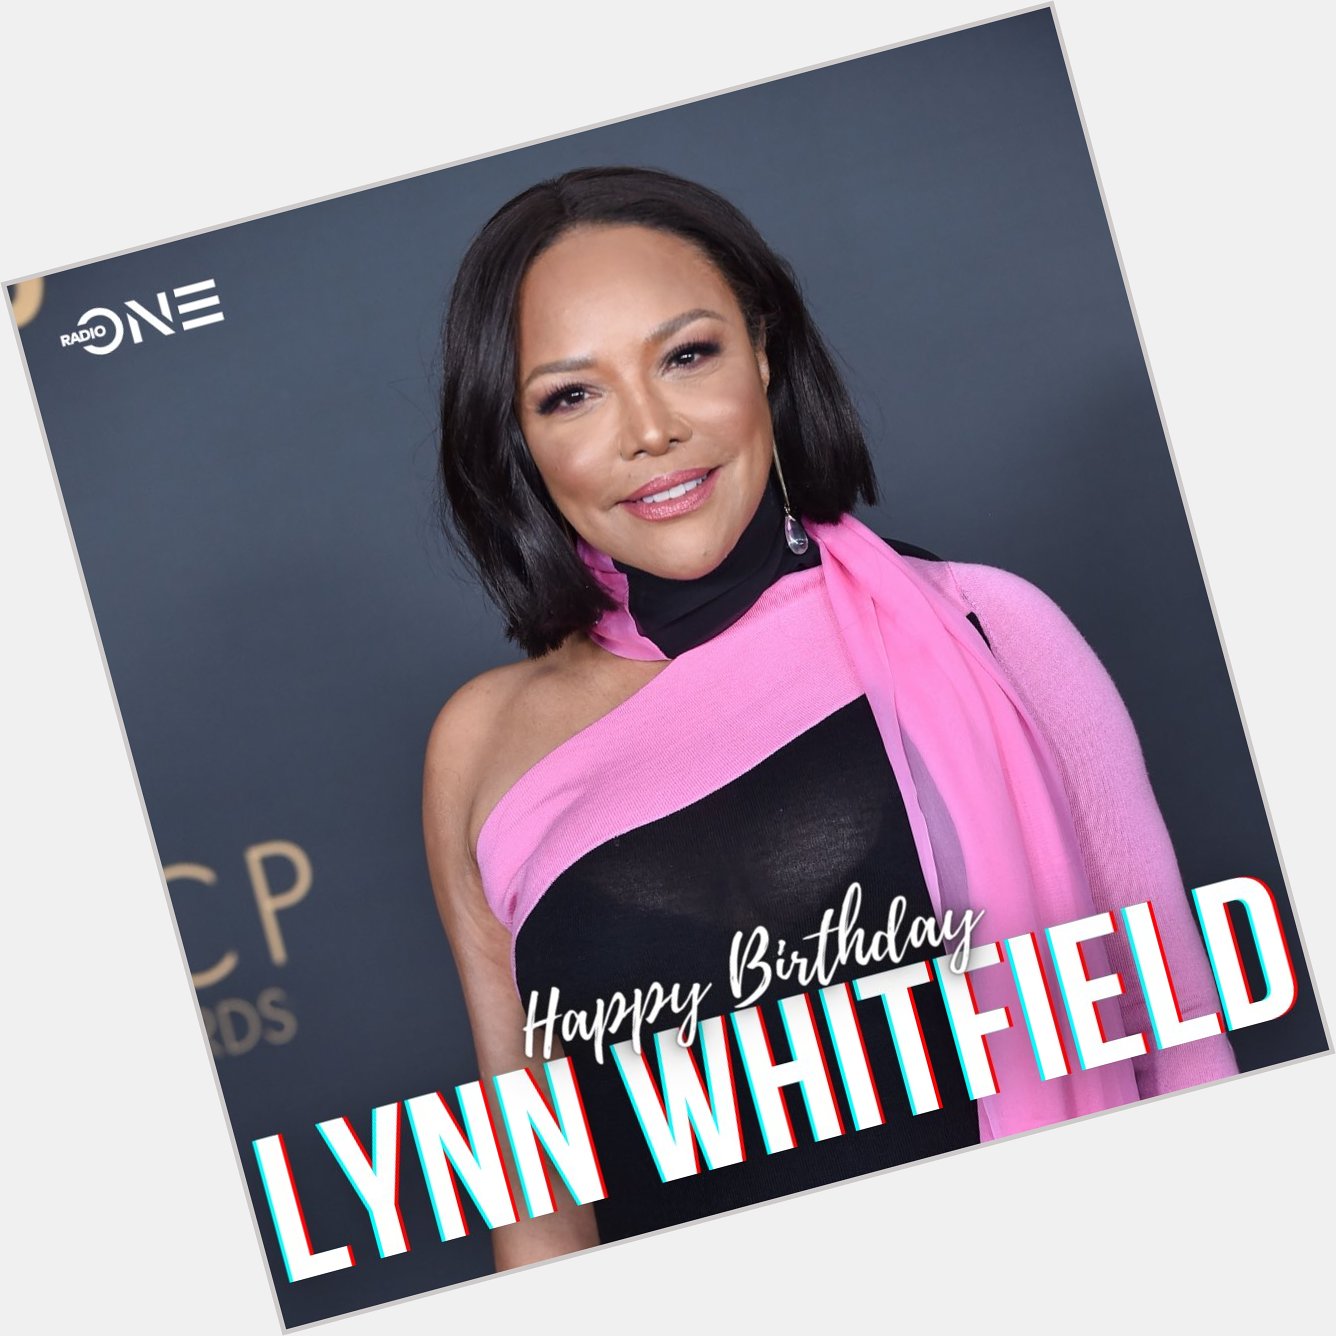 Cheers to our girl Lynn Whitfield  Wishing you a very happy birthday! 